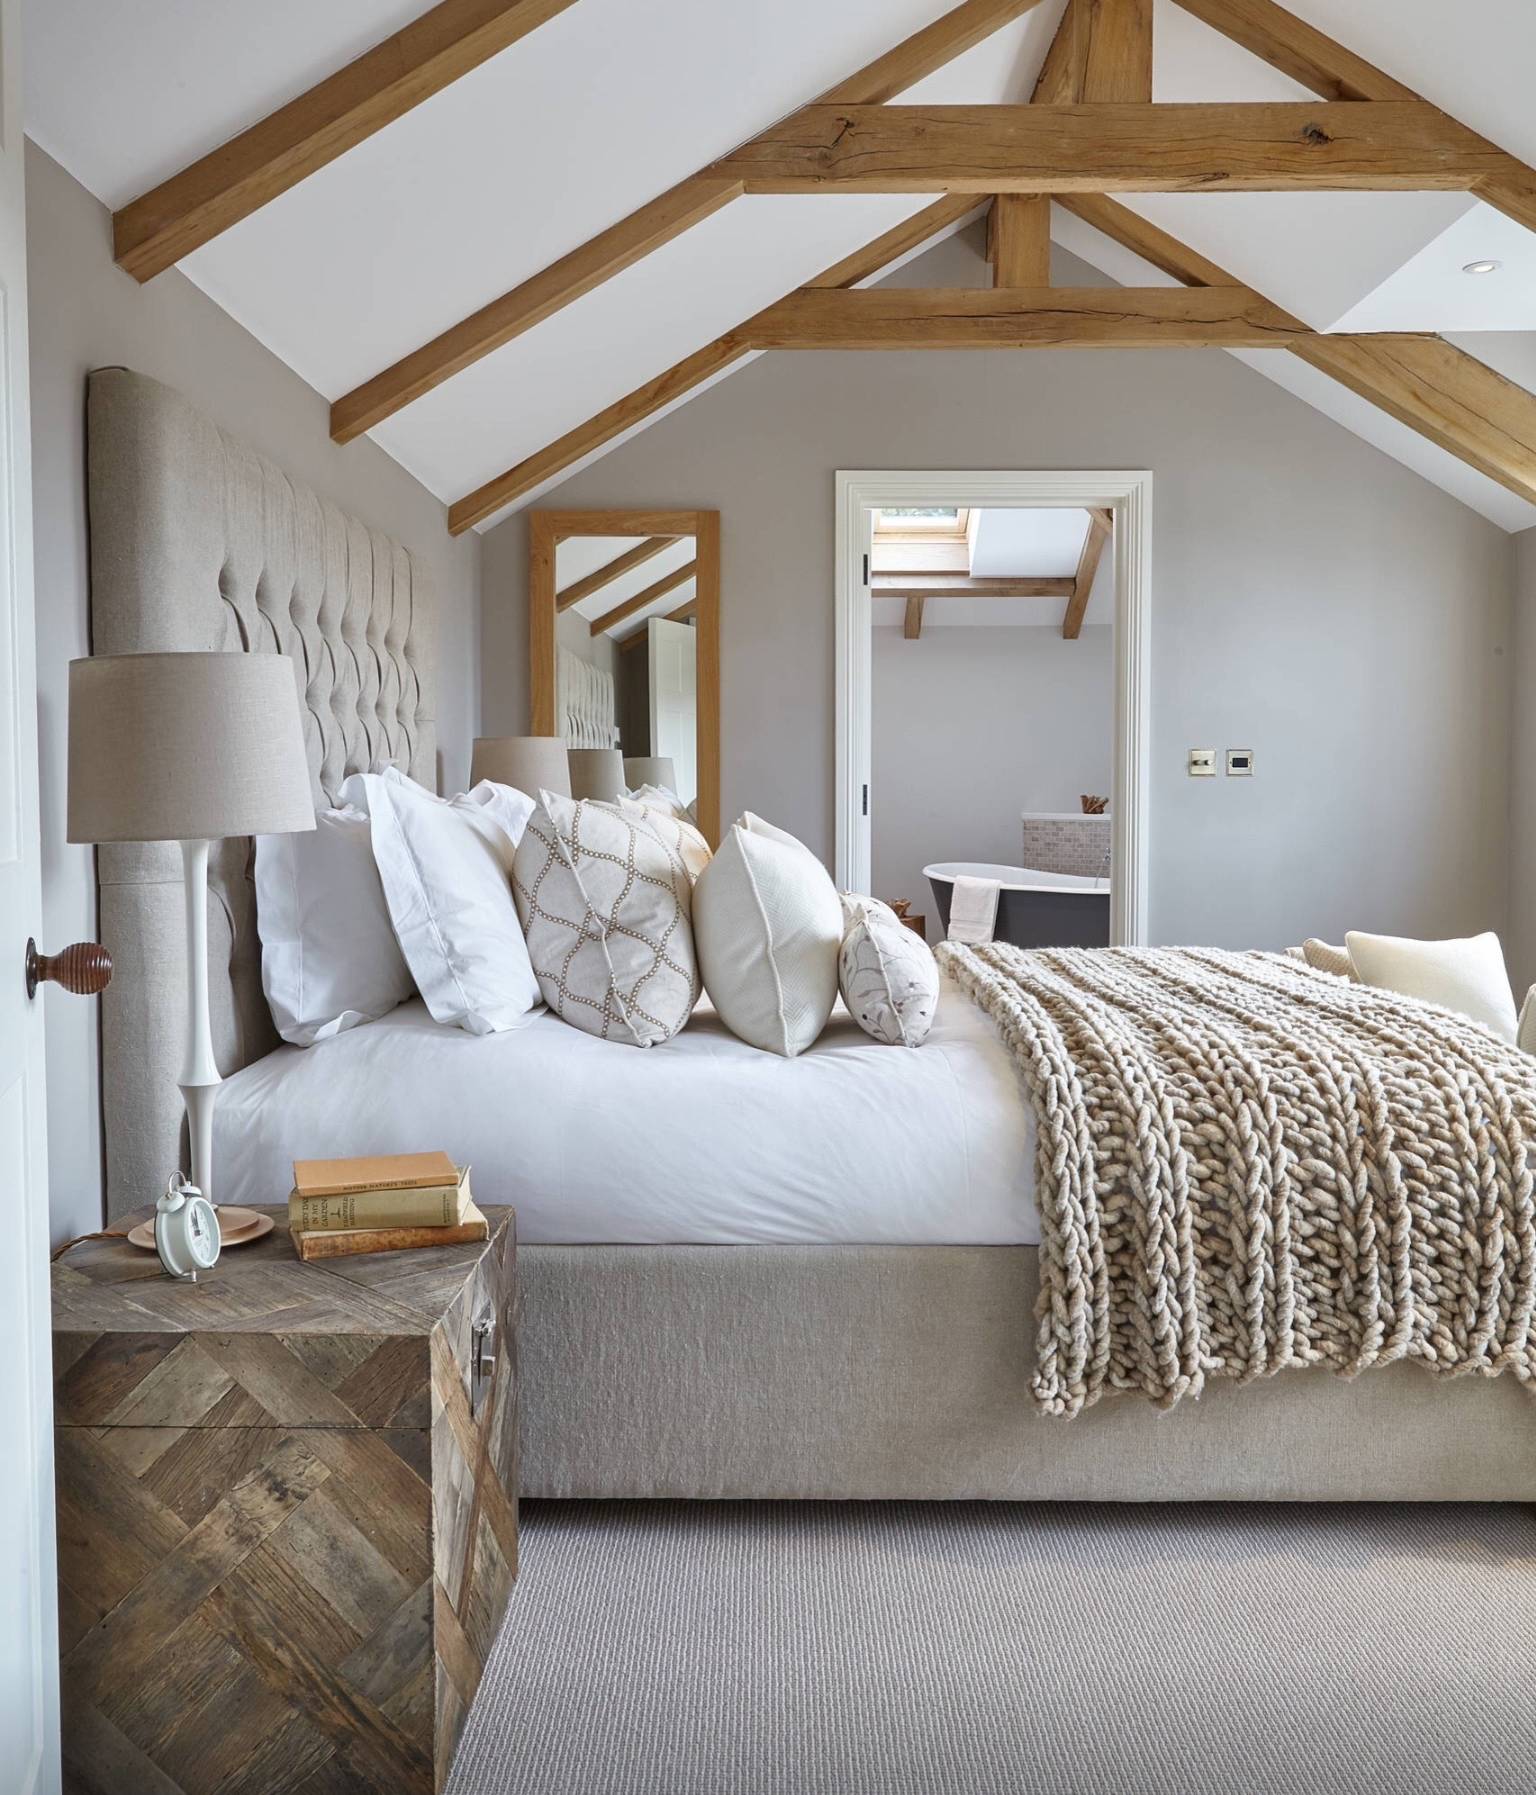 75 Carpeted Bedroom Ideas You'll Love - April, 2023 | Houzz